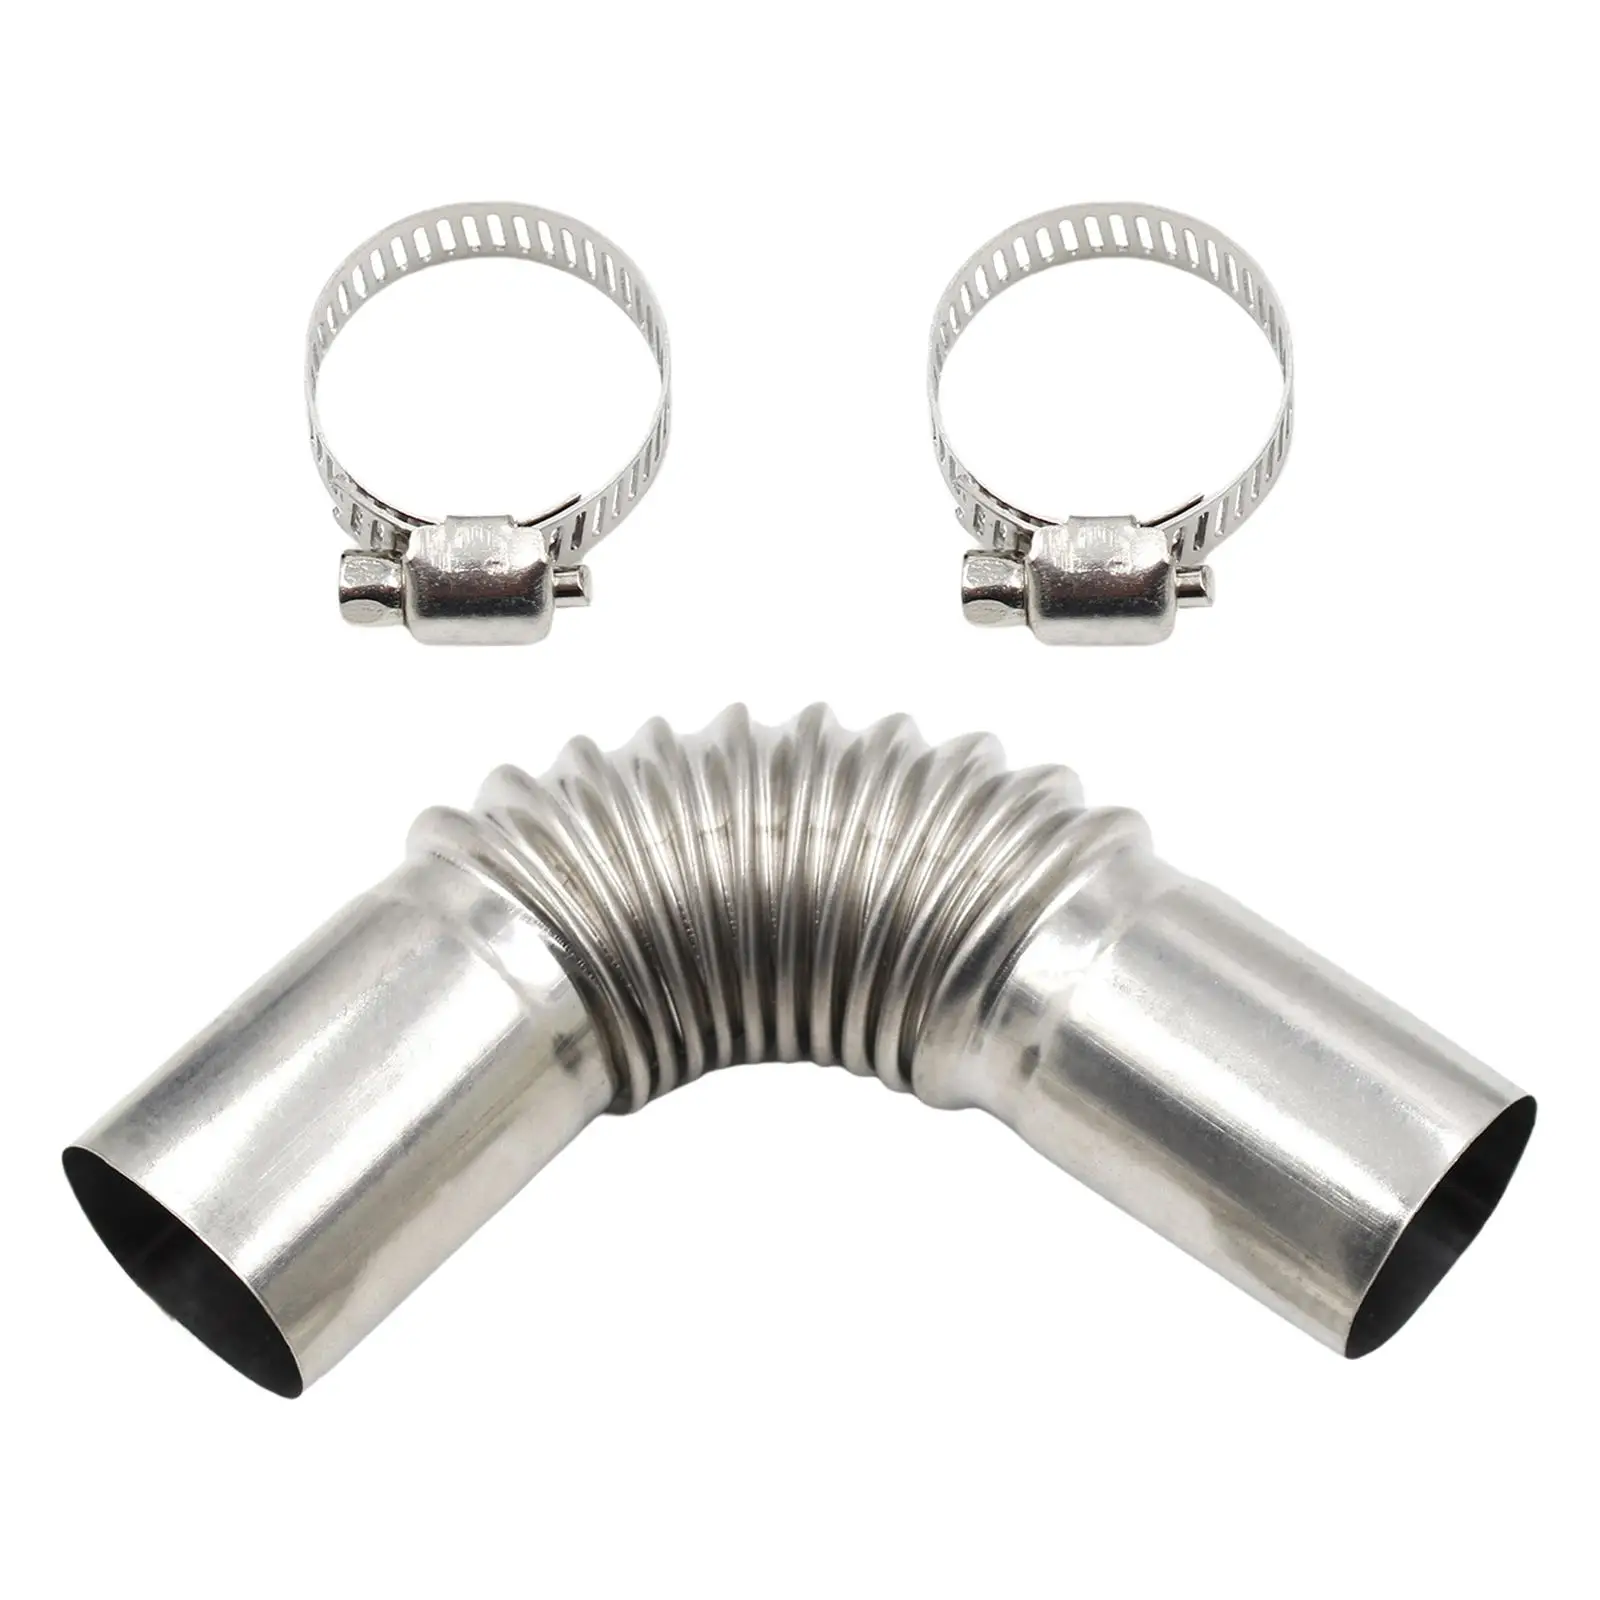 24mm Exhaust Pipe Tube Elbow Connector 25mm ID Stainless Steel Air Exhaust Pipes Connector for Heater W/ Clamps